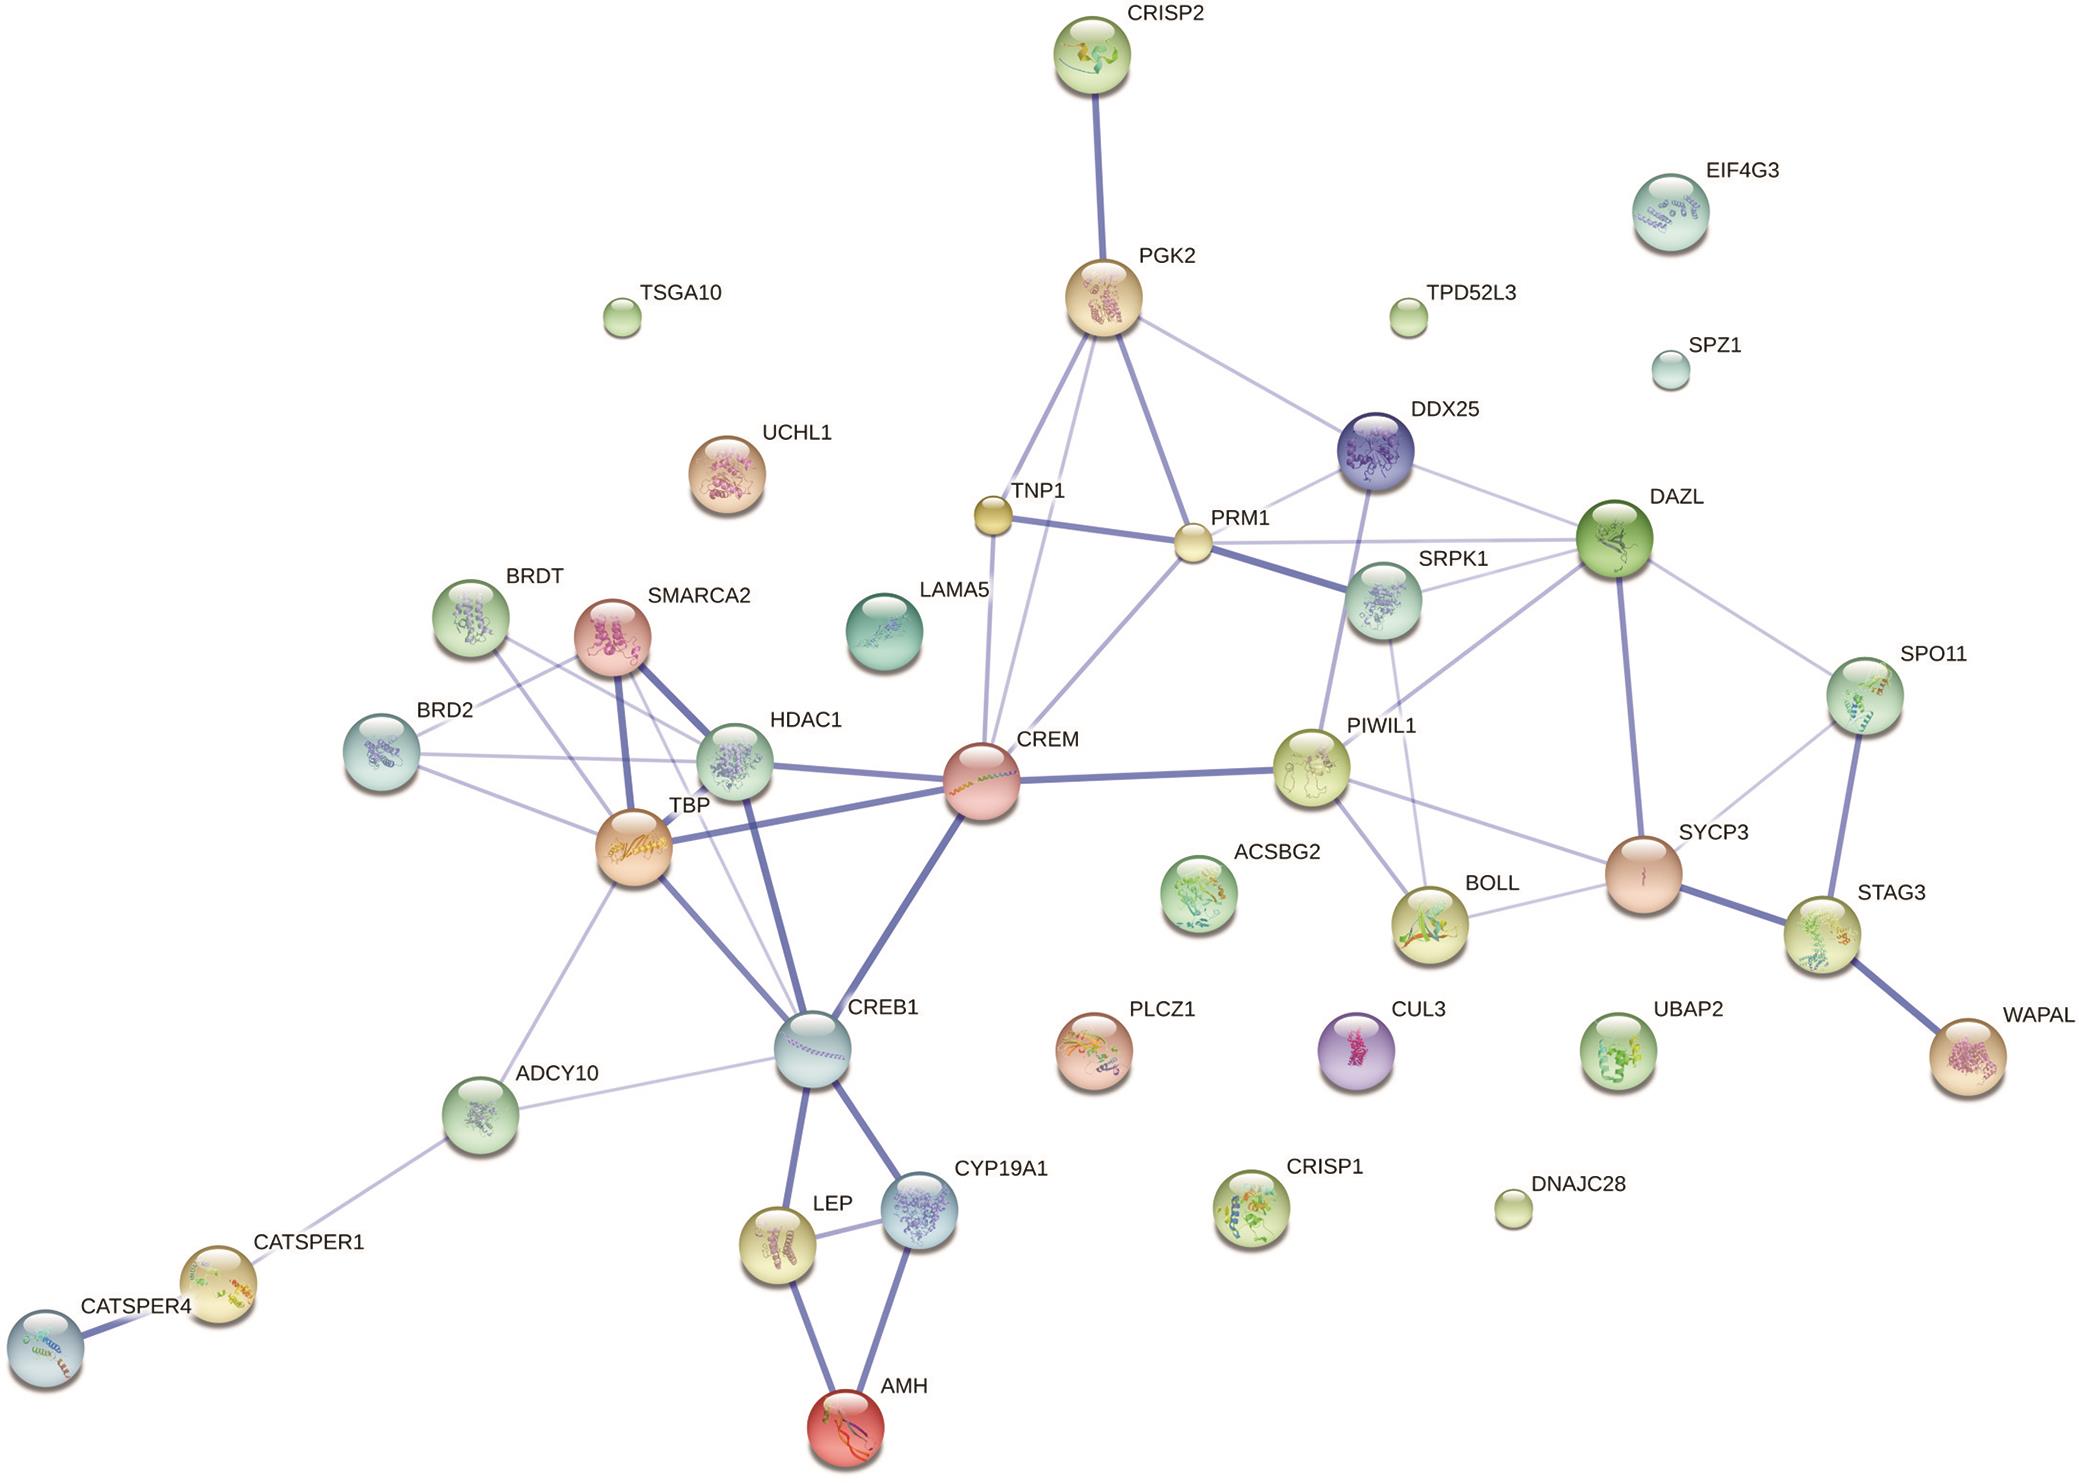 Illustration of interactions between the 38 differentially-expressed genes in patients with hypospermatogenesis (STRING v.10, confidence view).